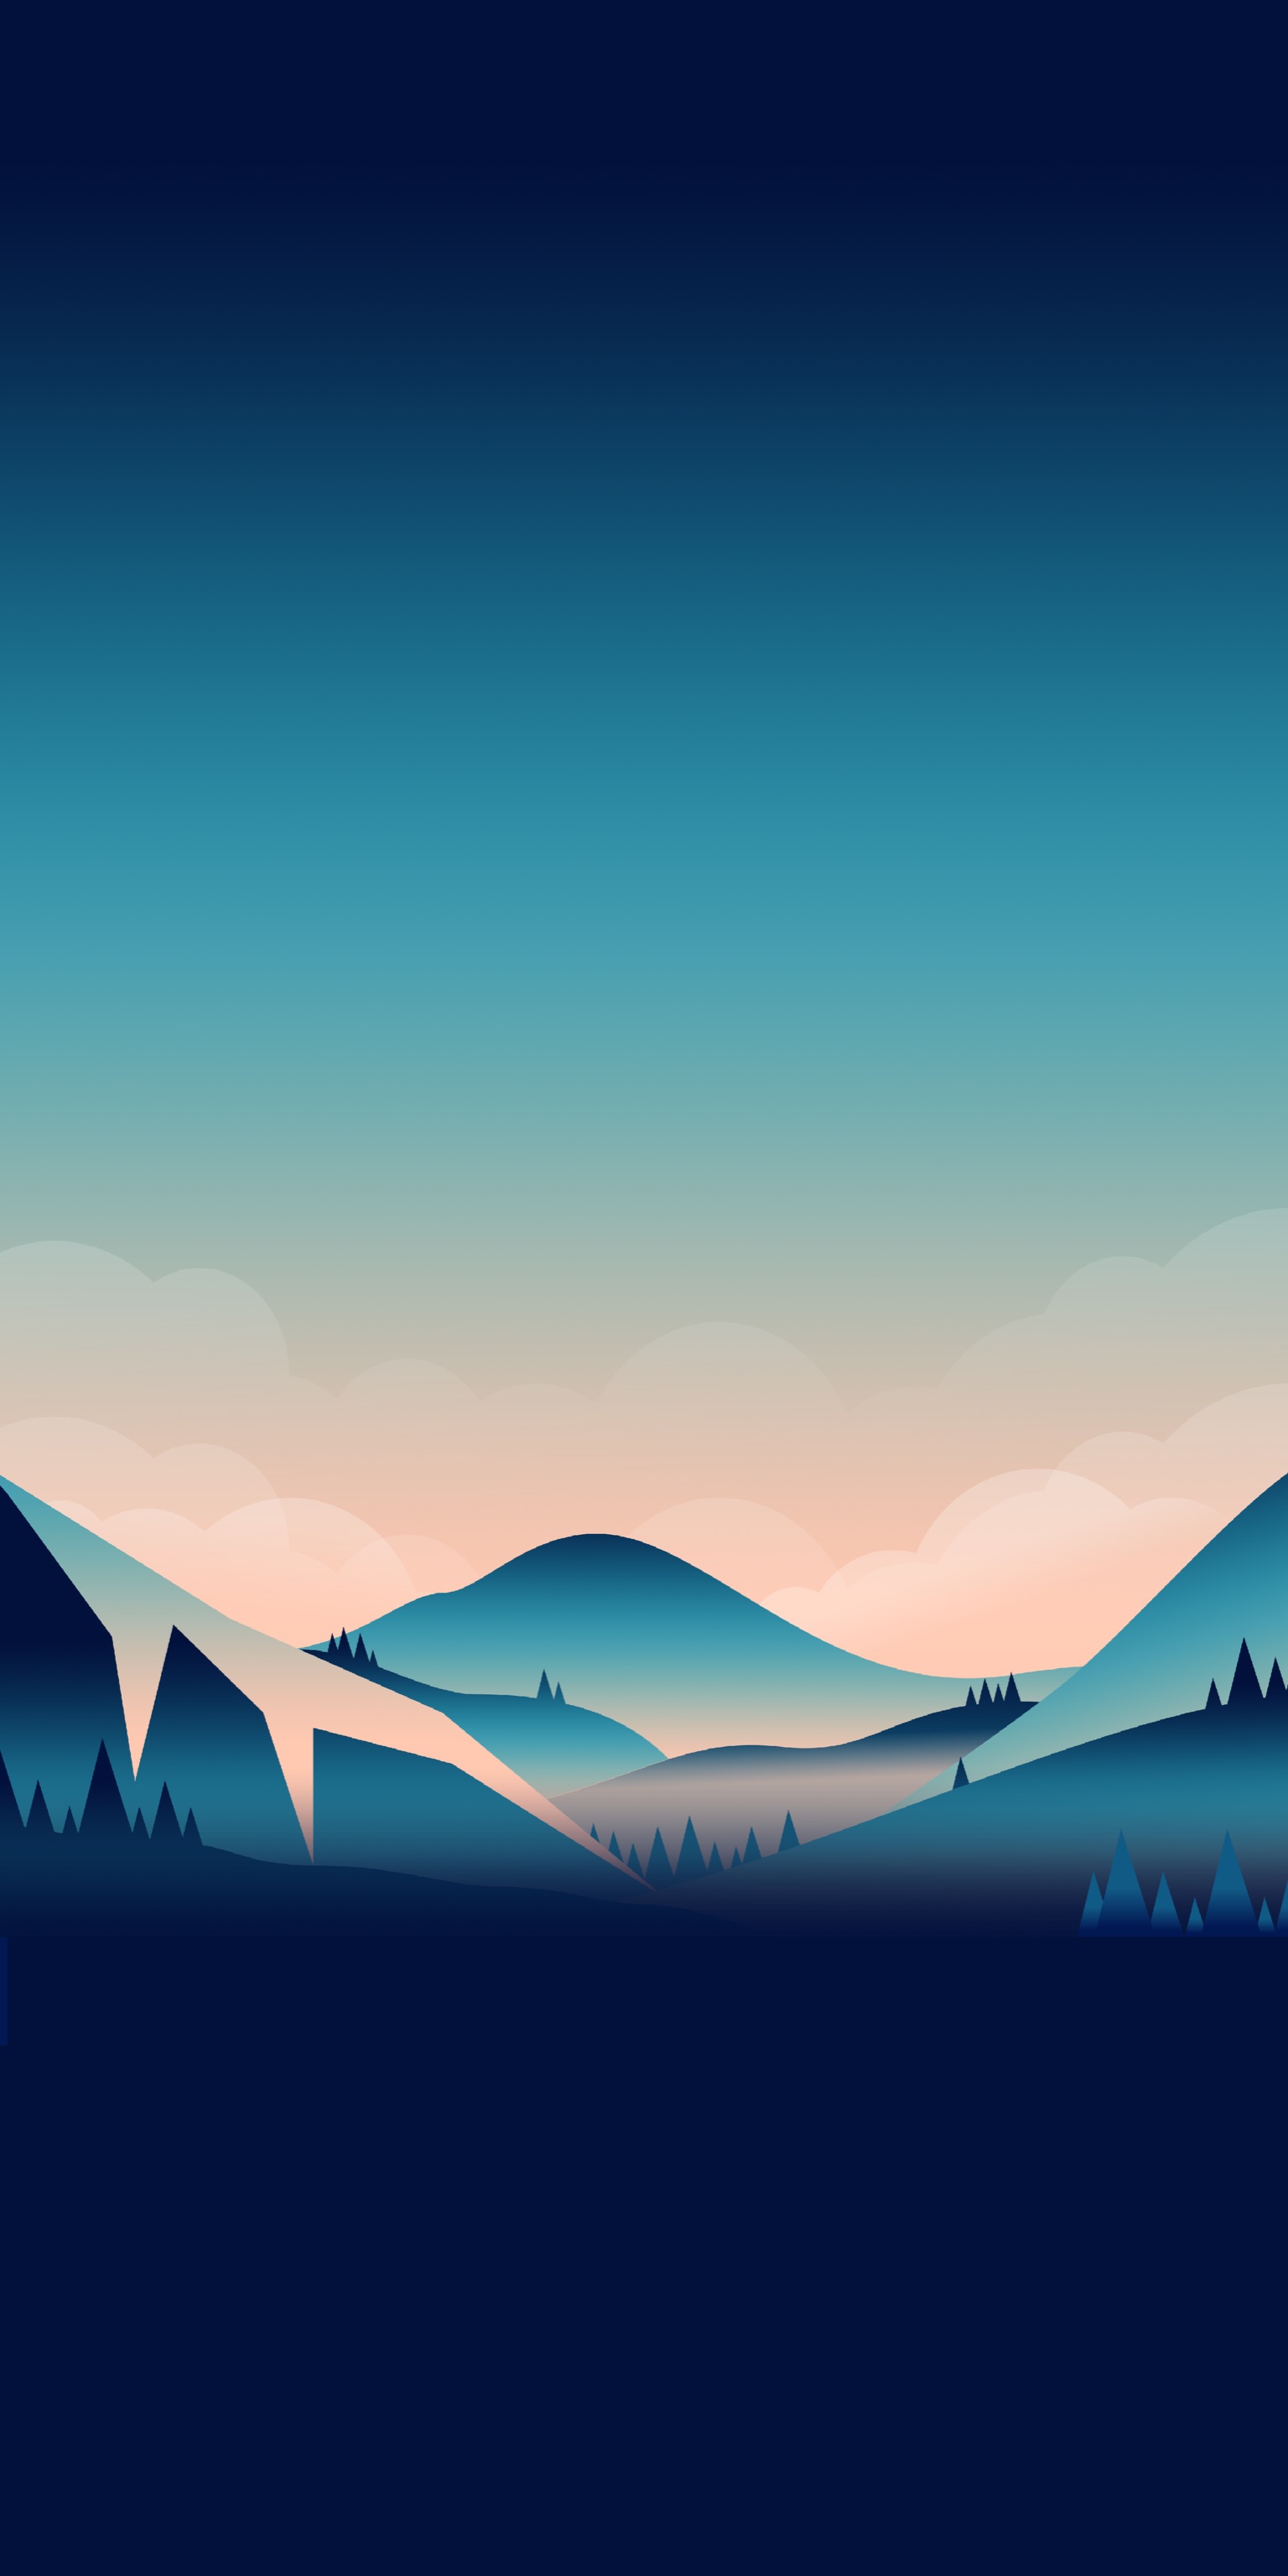 15 Worthy landscape wallpapers for iPhone in 2023 - iGeeksBlog